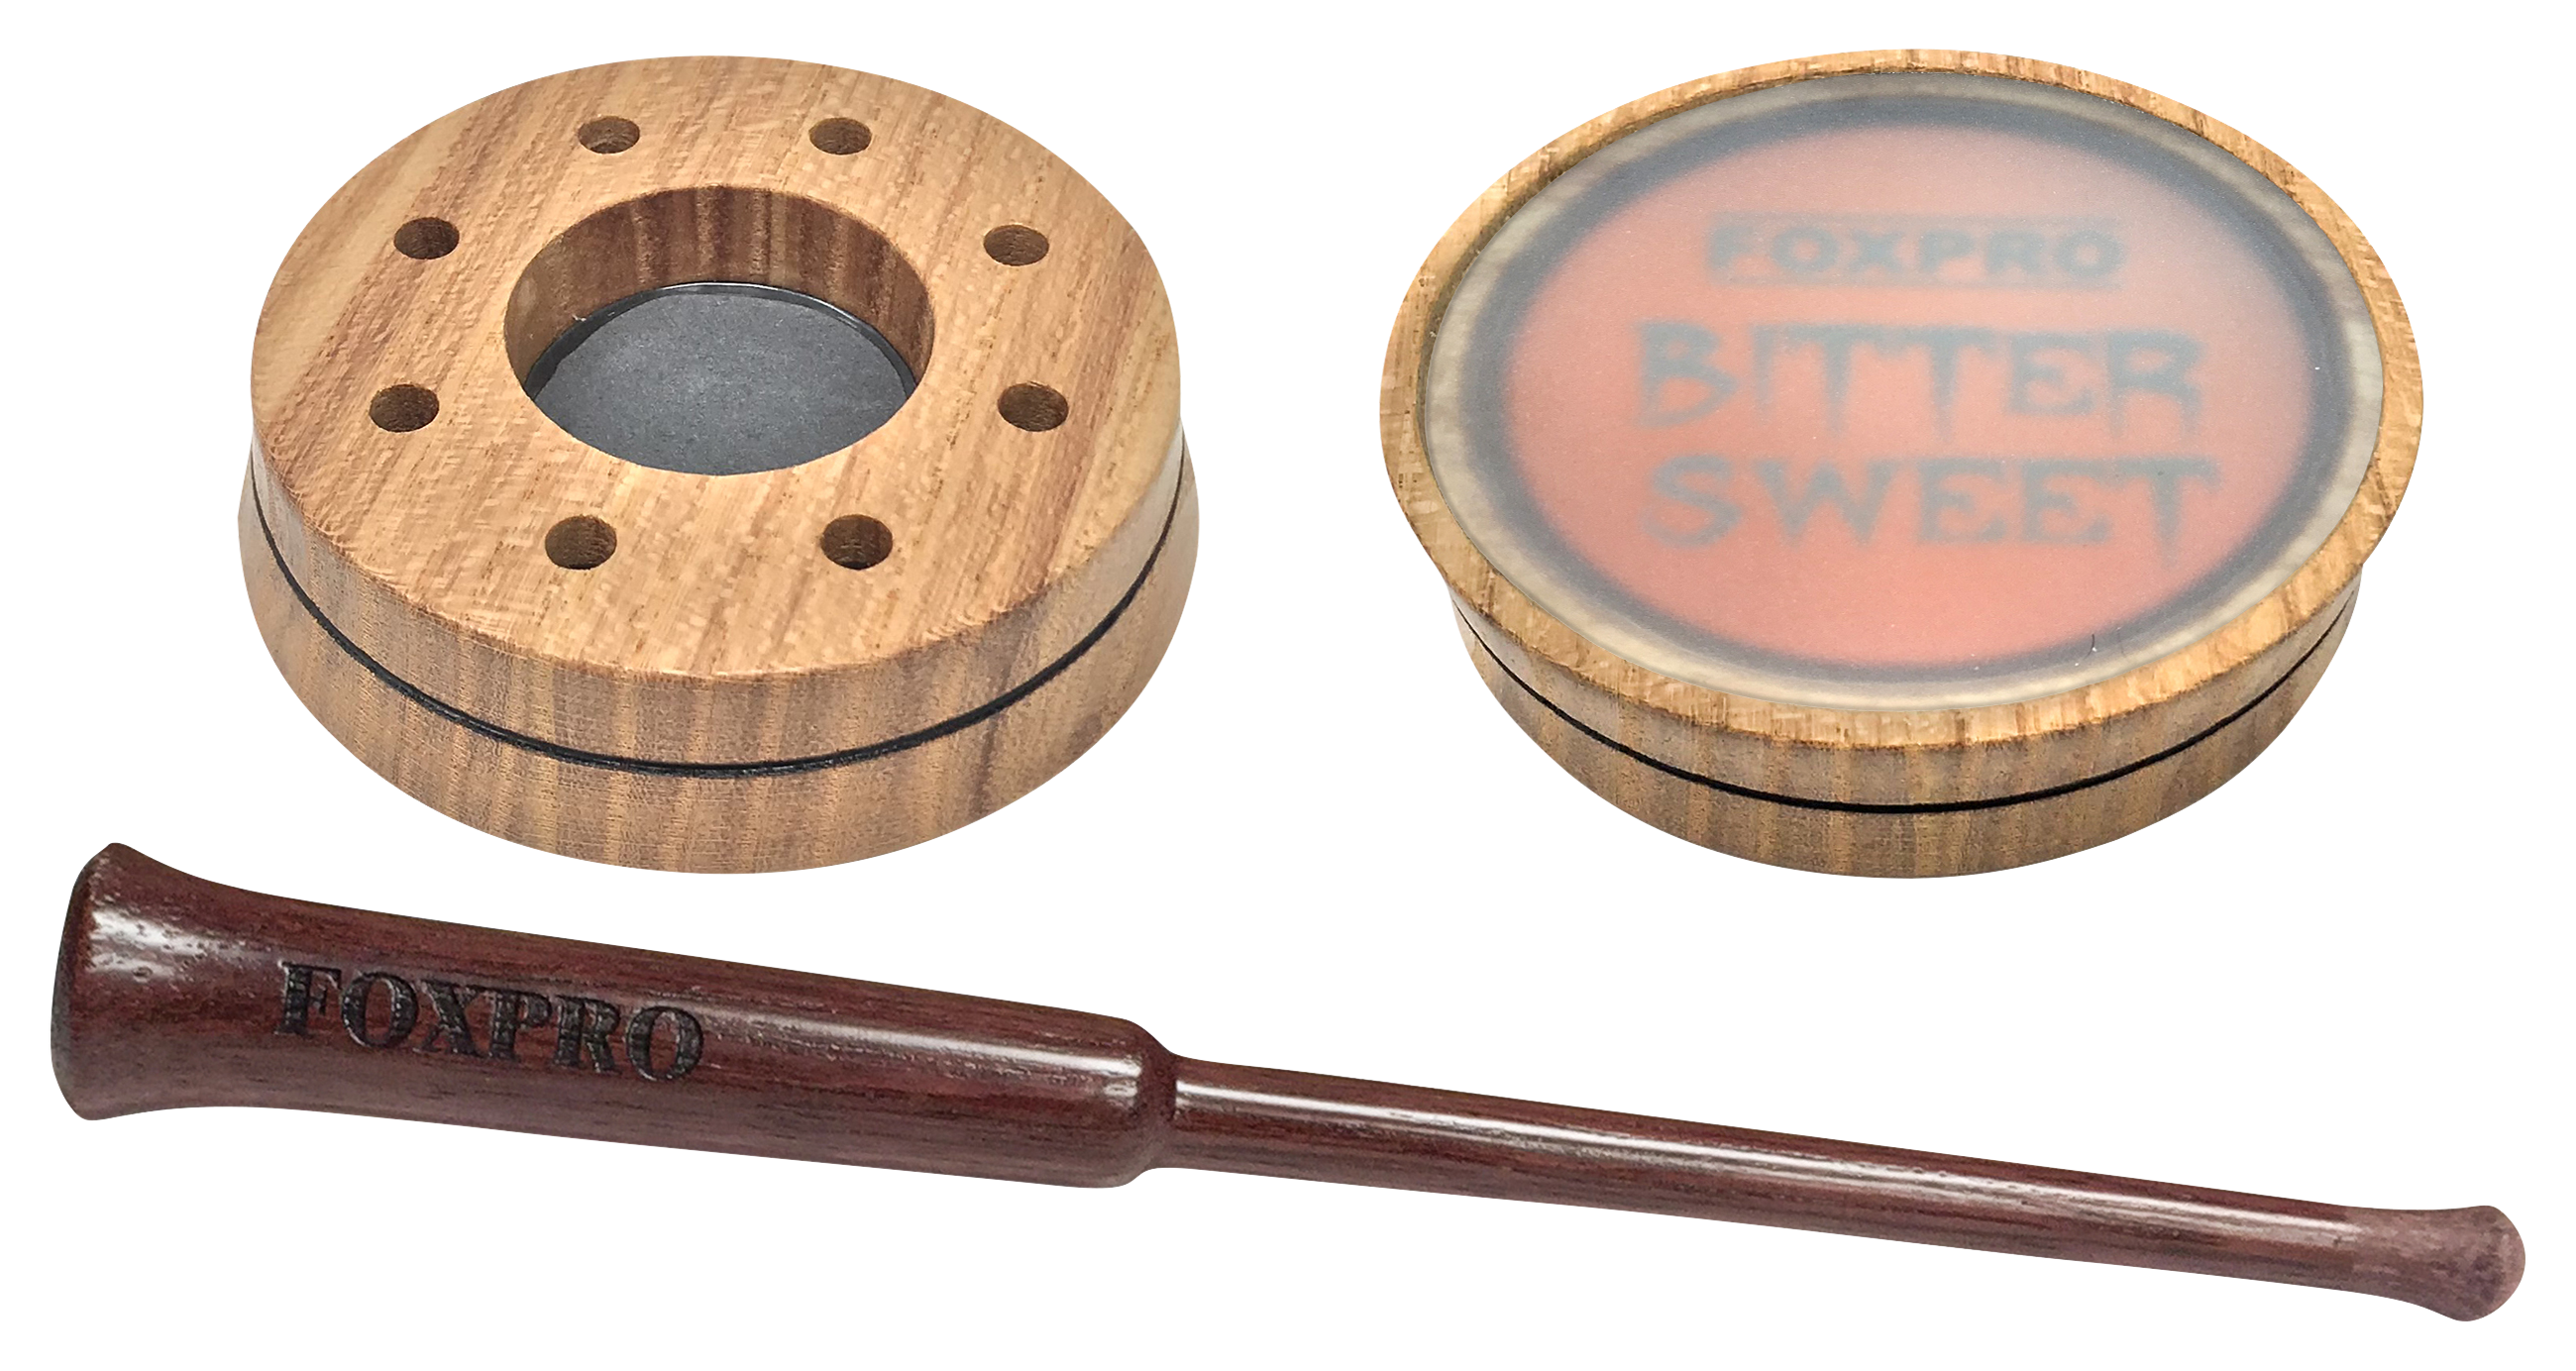 FOXPRO Bittersweet Glass Over Slate Friction Turkey Call